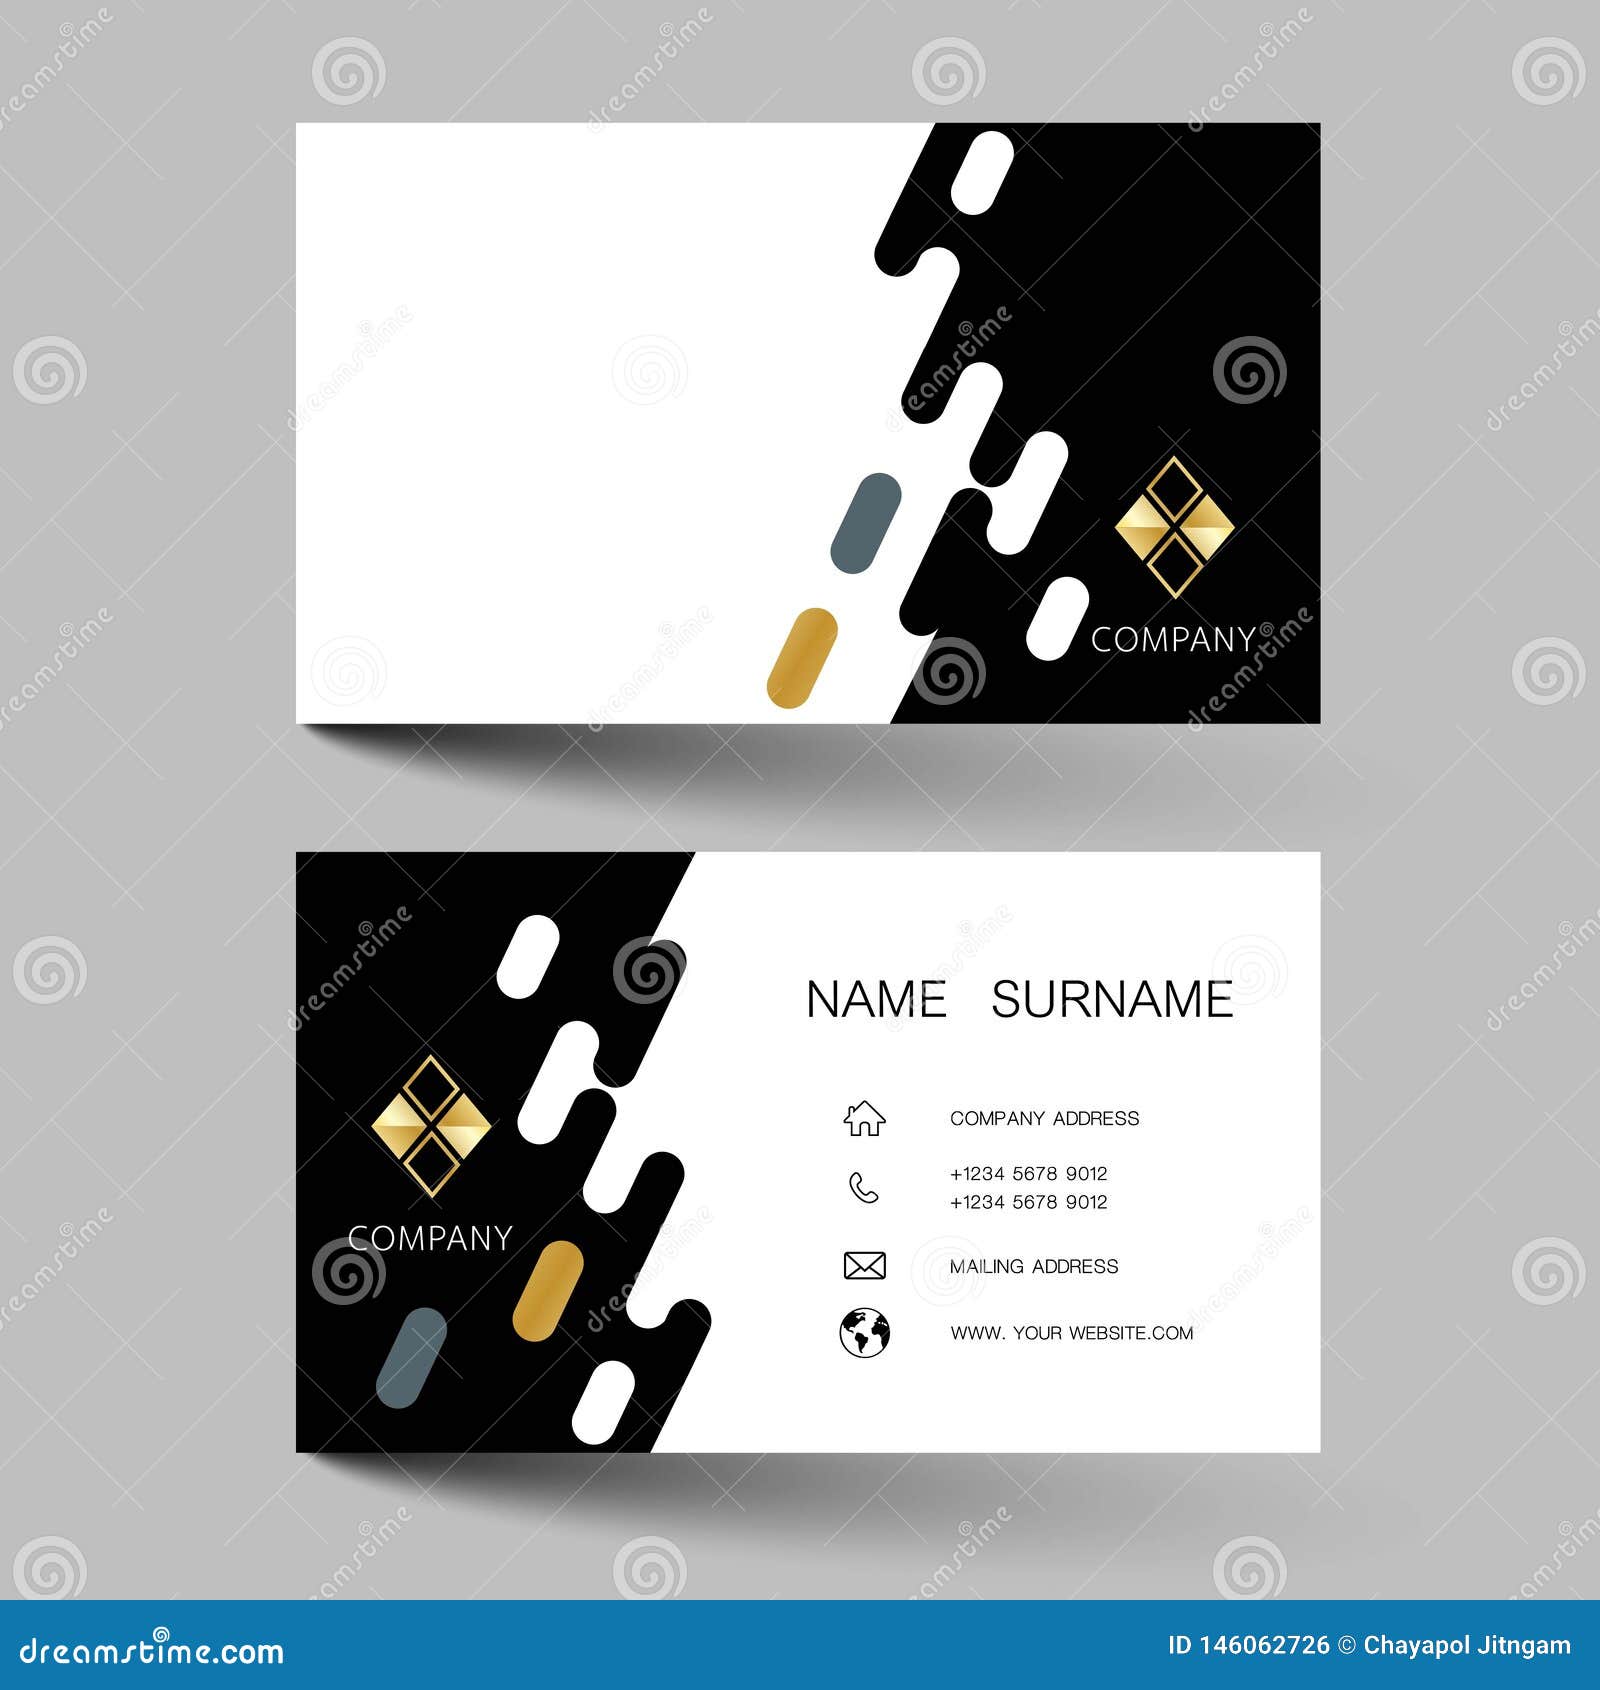 Creative And Black Business Card Design With Inspiration From The Abstract Stock Vector Illustration Of Brush Icons 146062726